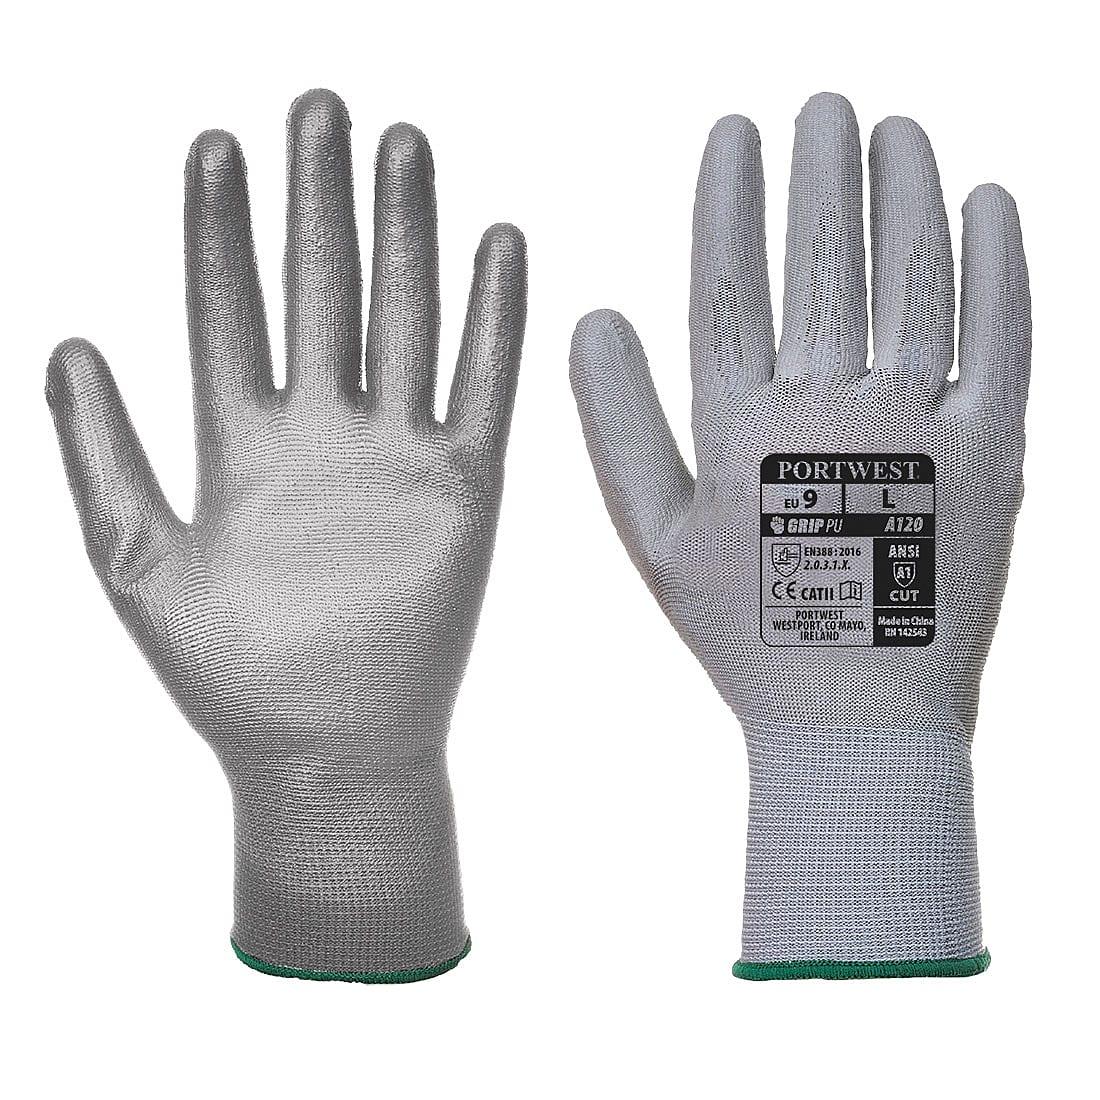 Portwest PU Palm Gloves in Grey (Product Code: A120)